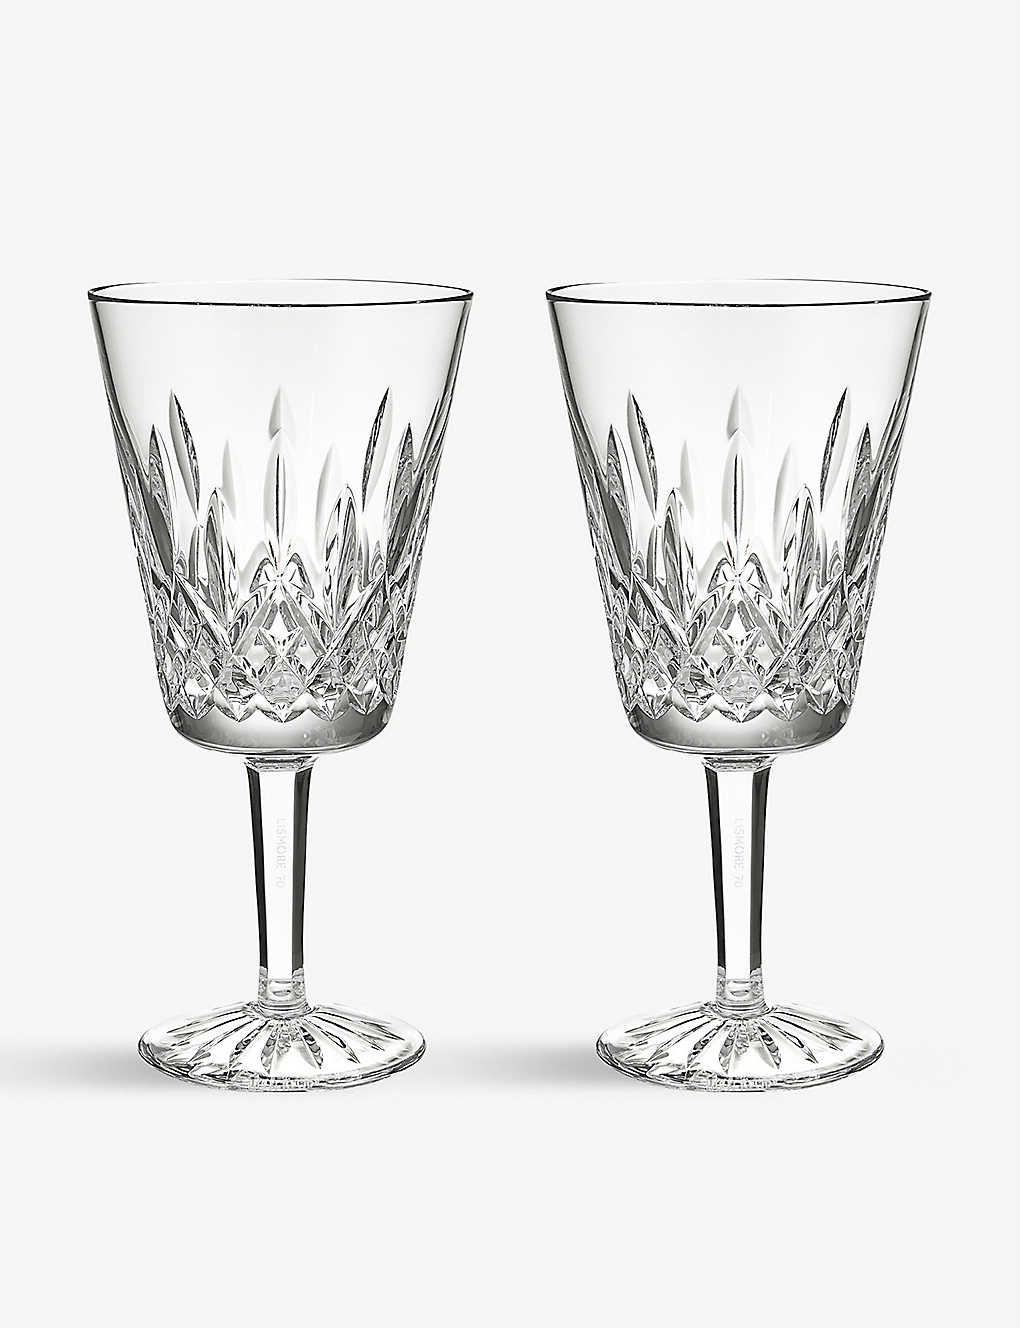 WATERFORD リズモア 1952 ミディアム クリスタルグラス ゴブレット 2個セット Lismore 1952 medium crystal-glass goblets set of two